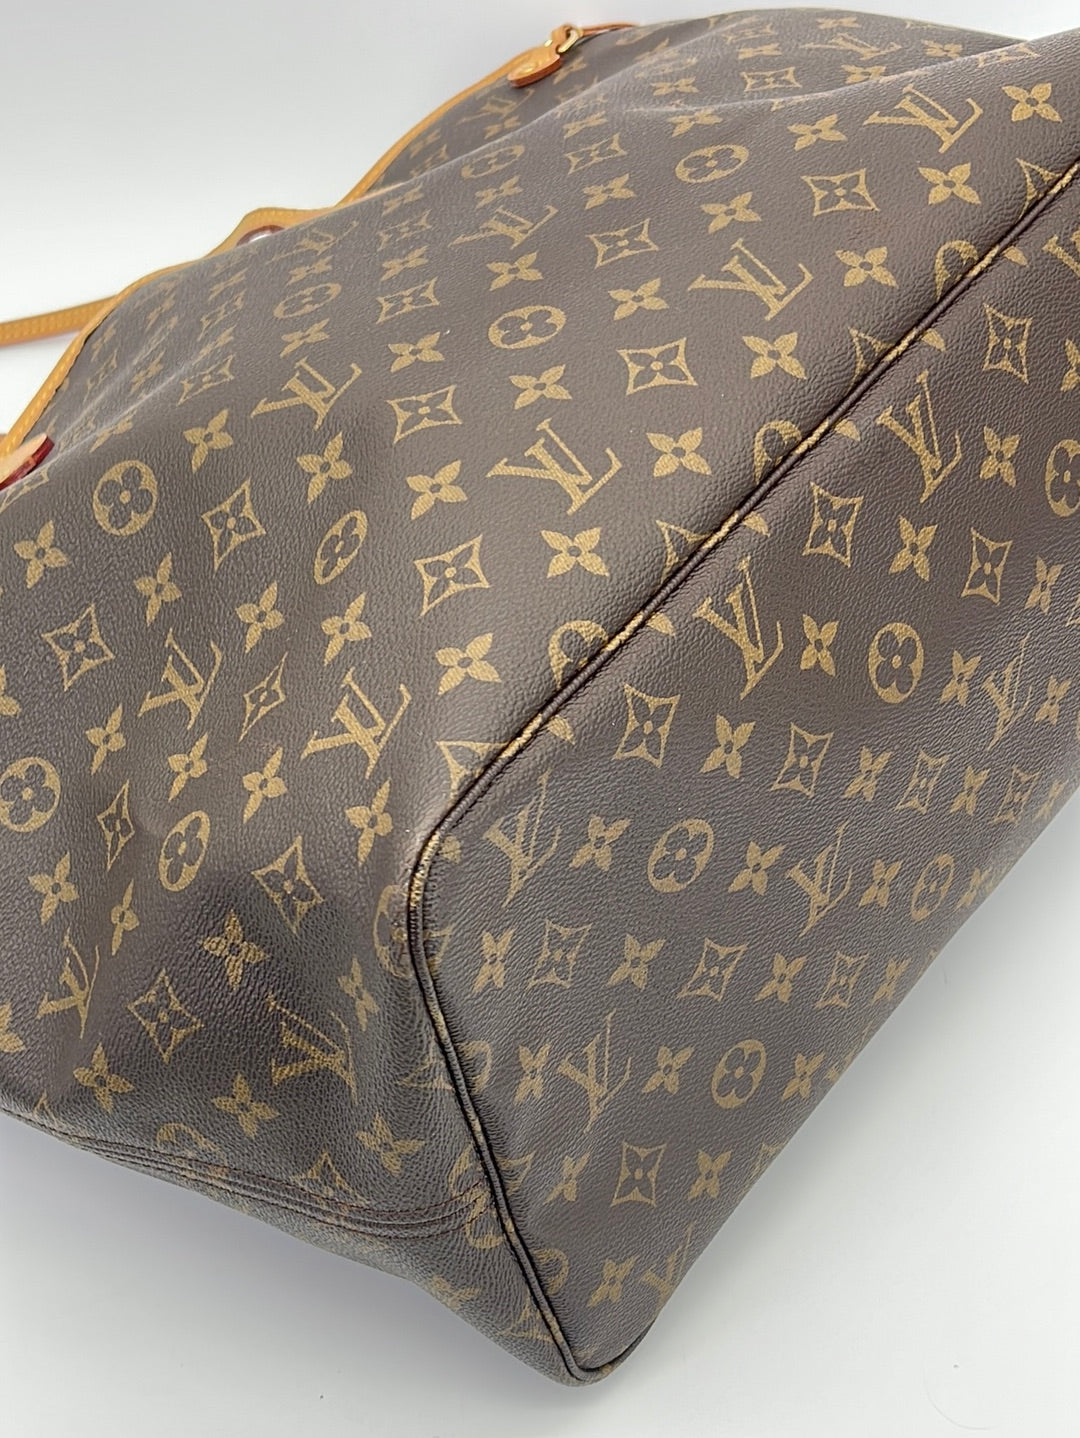 PRELOVED Louis Vuitton Monogram Canvas Neverfull GM Tote Bag SP3180 063023